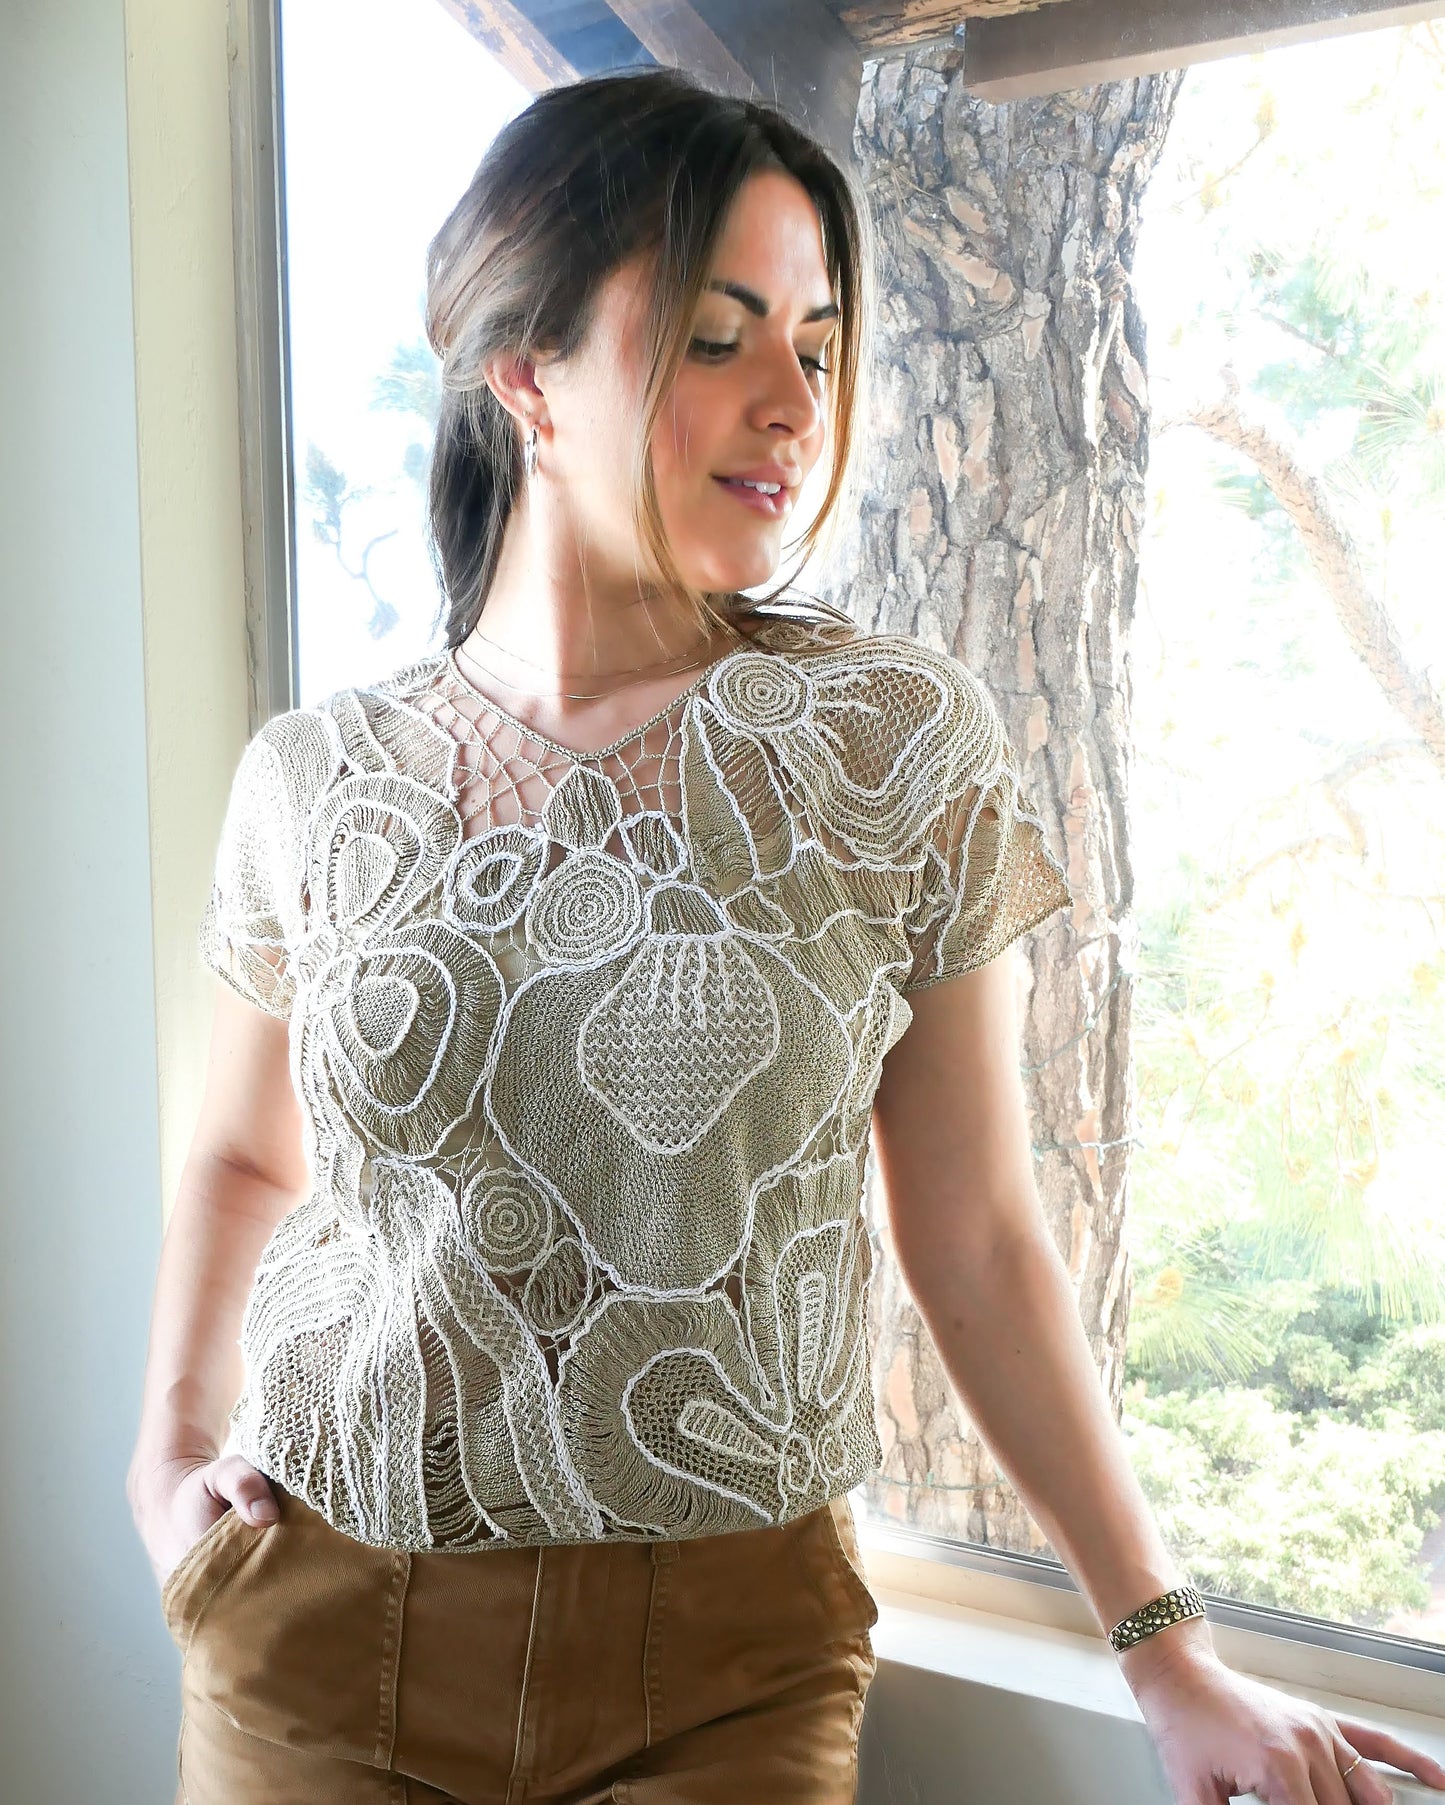 Refresh your wardrobe with this abstract floral patterned hand crocheted Lim's Vintage original high V-neck pullover top from the 1980s in neutral tones of taupe and white.  Pair it with jeans or shorts and sandals, or dress it up with a flowy skirt and wedges for a night out on a warm, summer's eve.